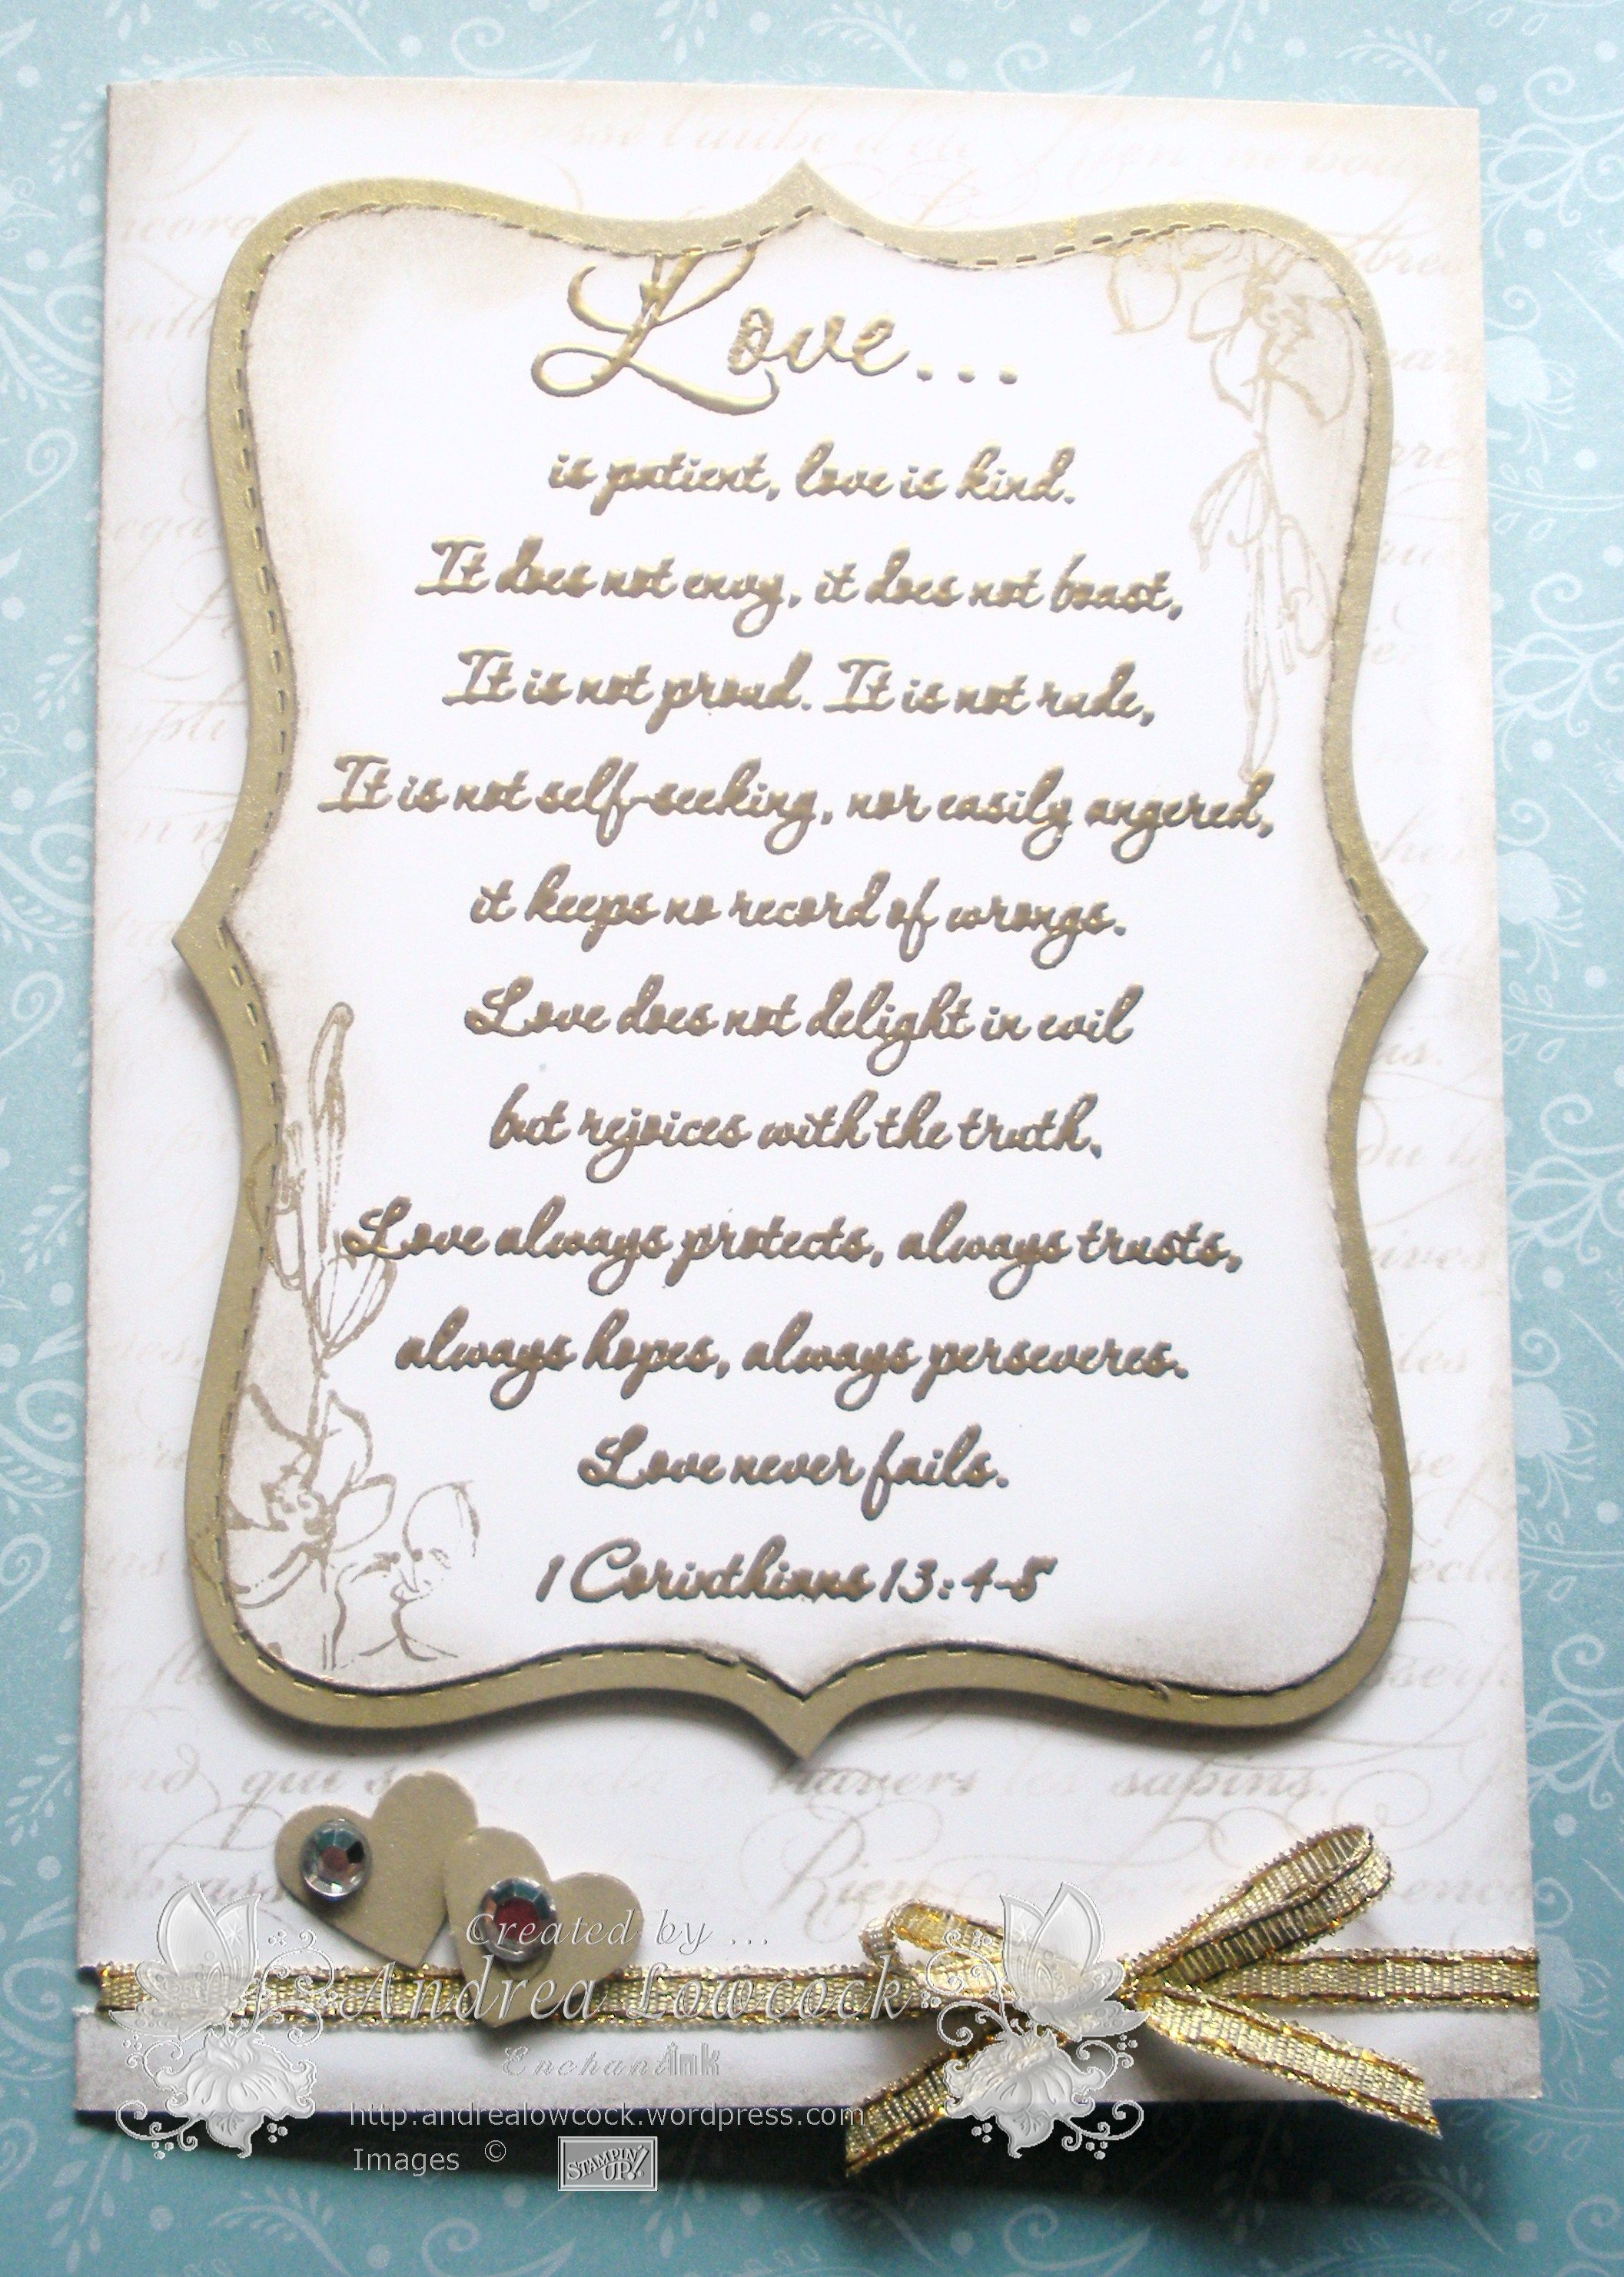 Words For 50th Wedding Anniversary Card